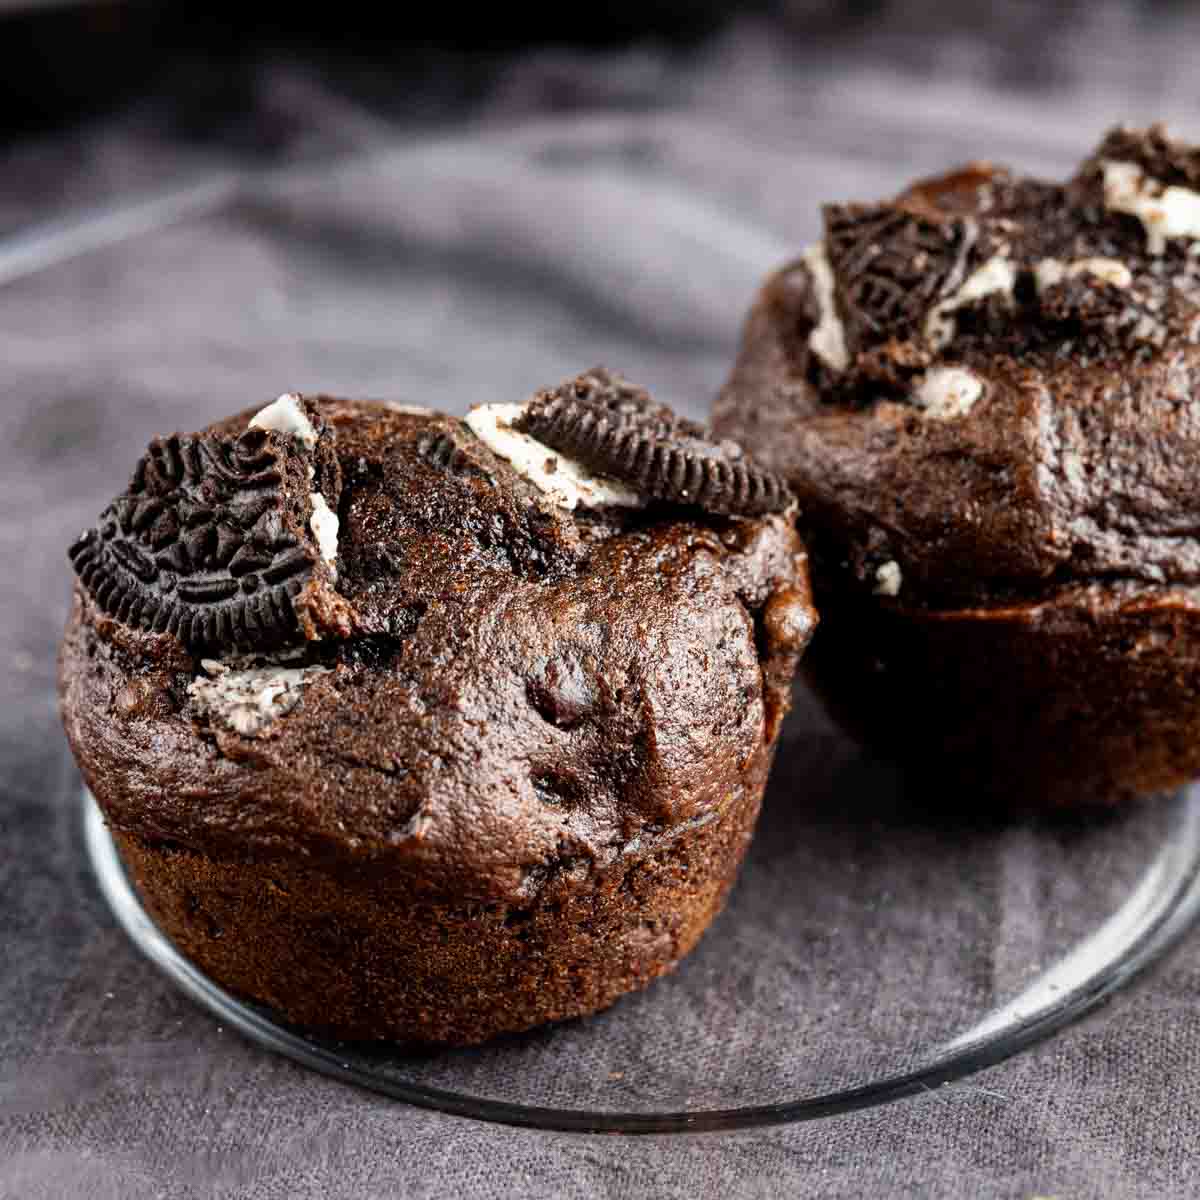 Chocolate oreo muffins on a glass plate.